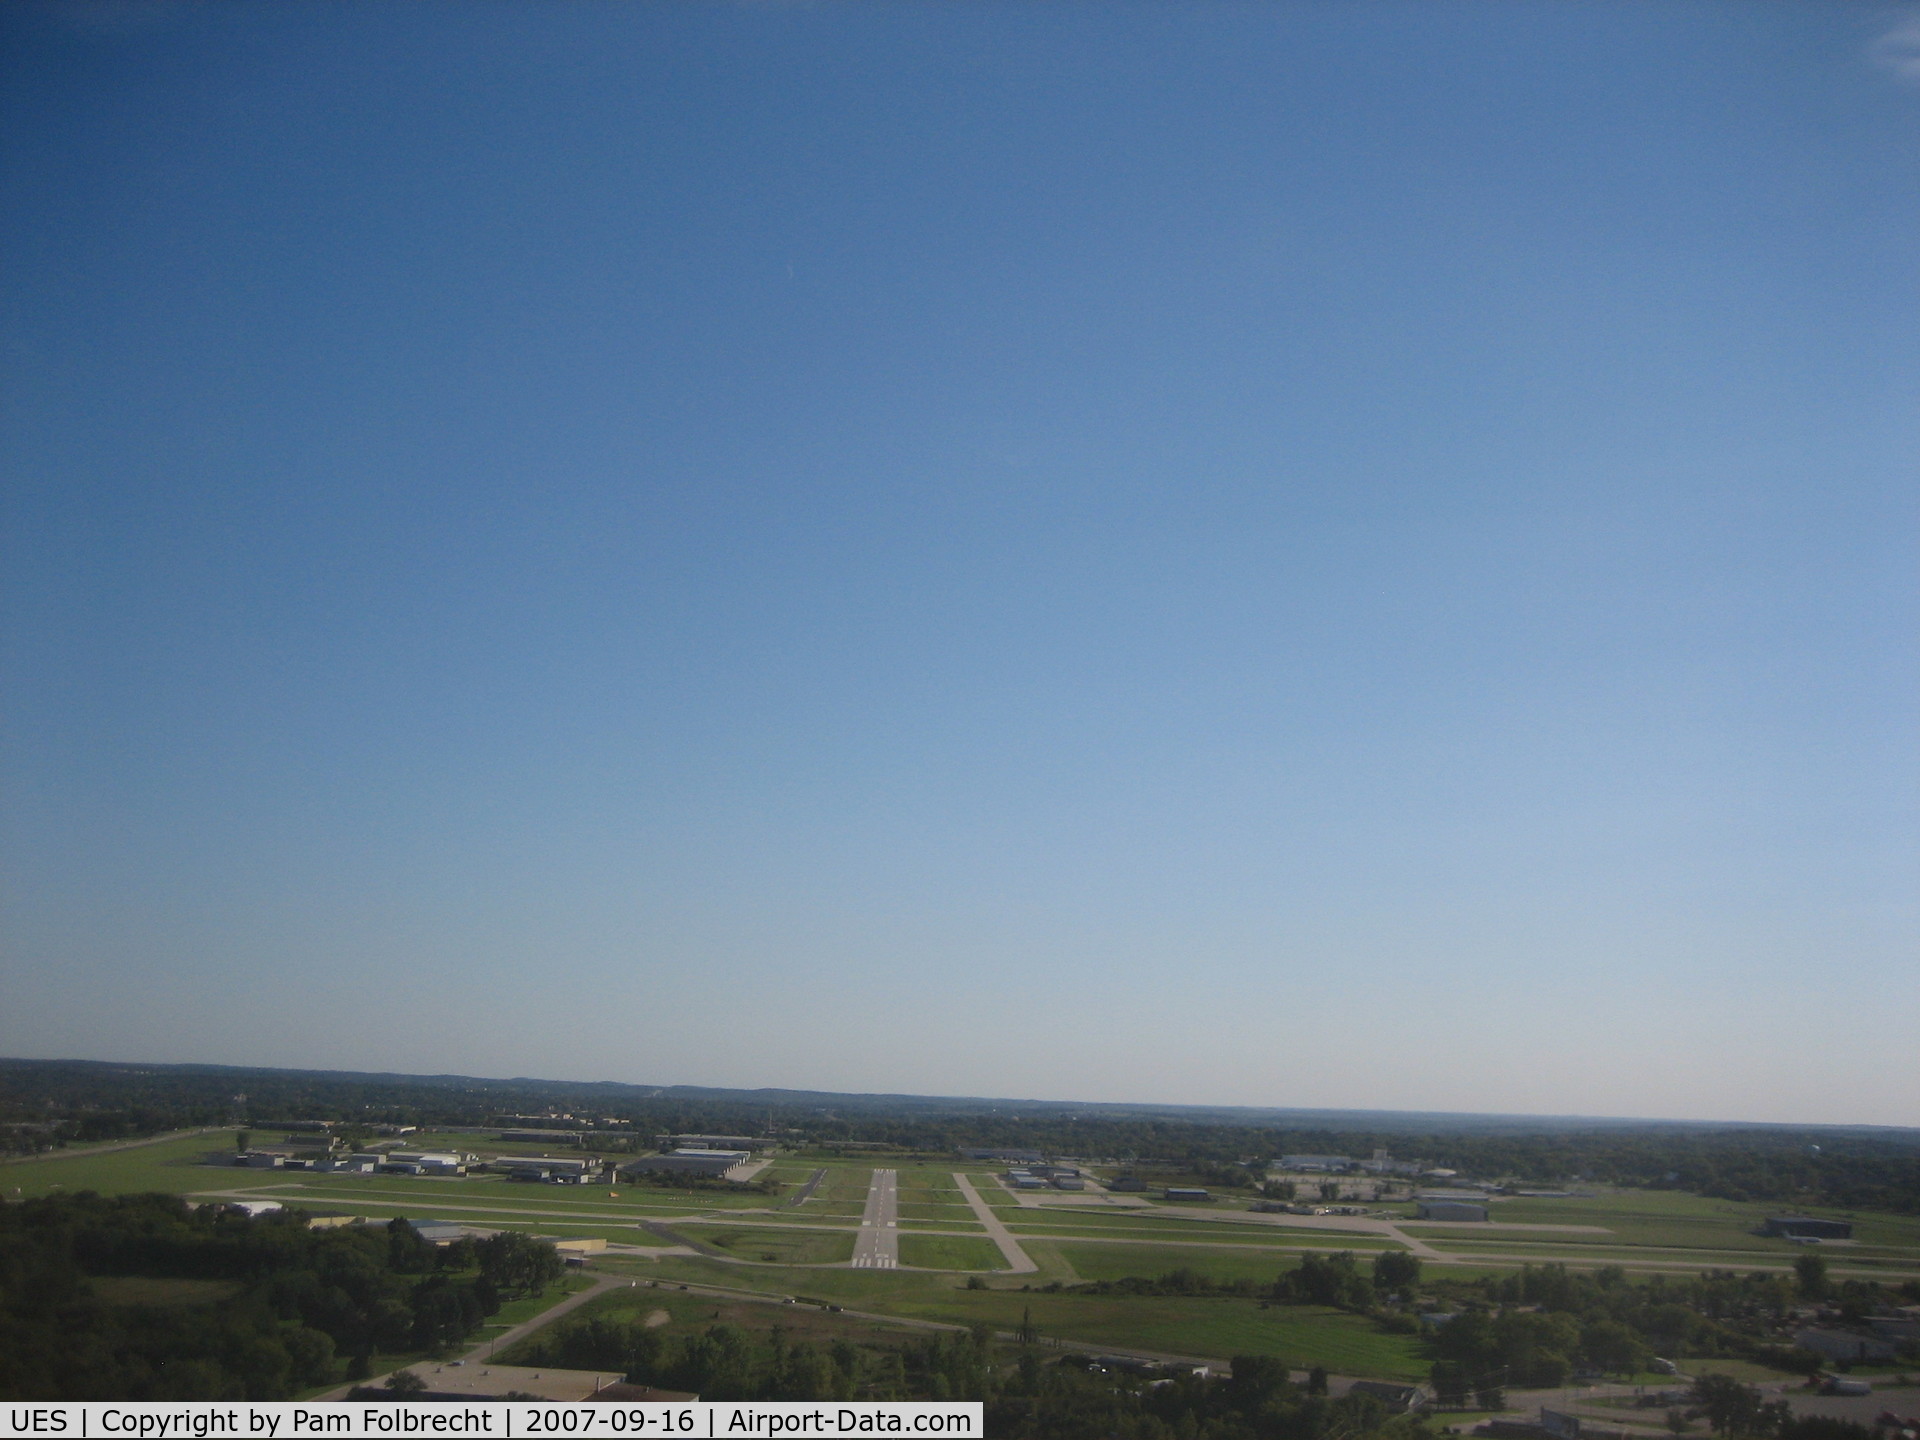 Waukesha County Airport (UES) - UES Field-Final to 18